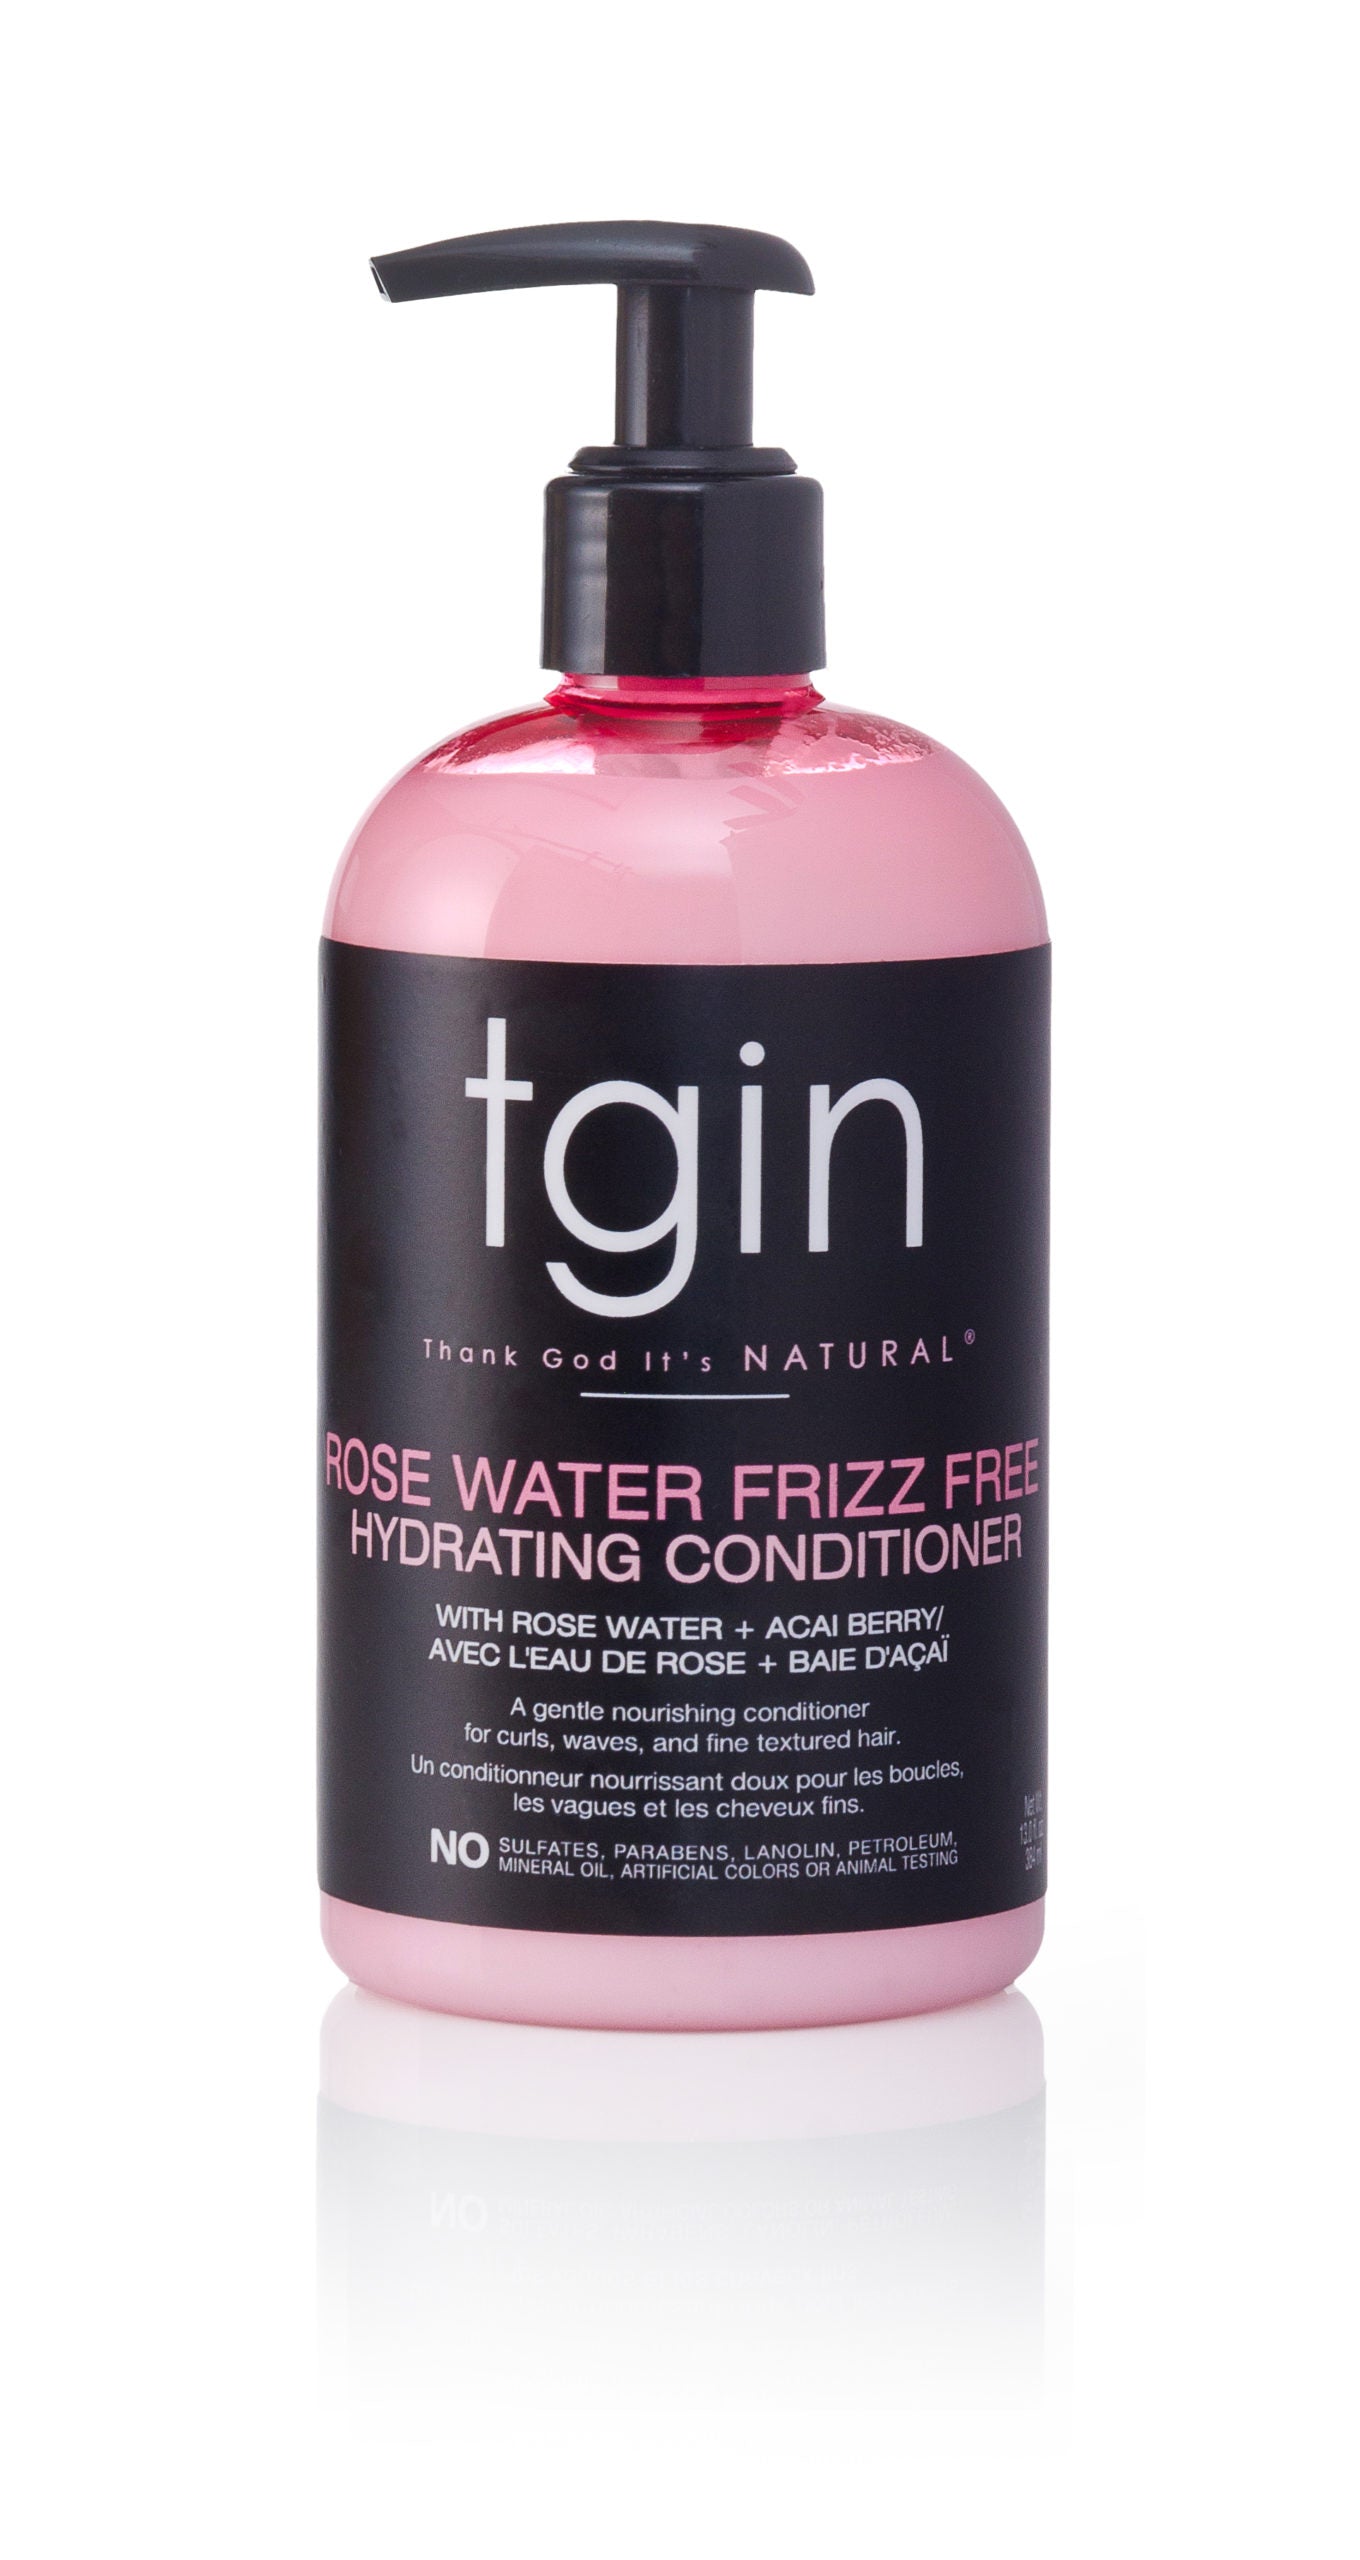 TGIN ROSE WATER FRIZZ FREE HYDRATING CONDITIONER 13.0 OZ